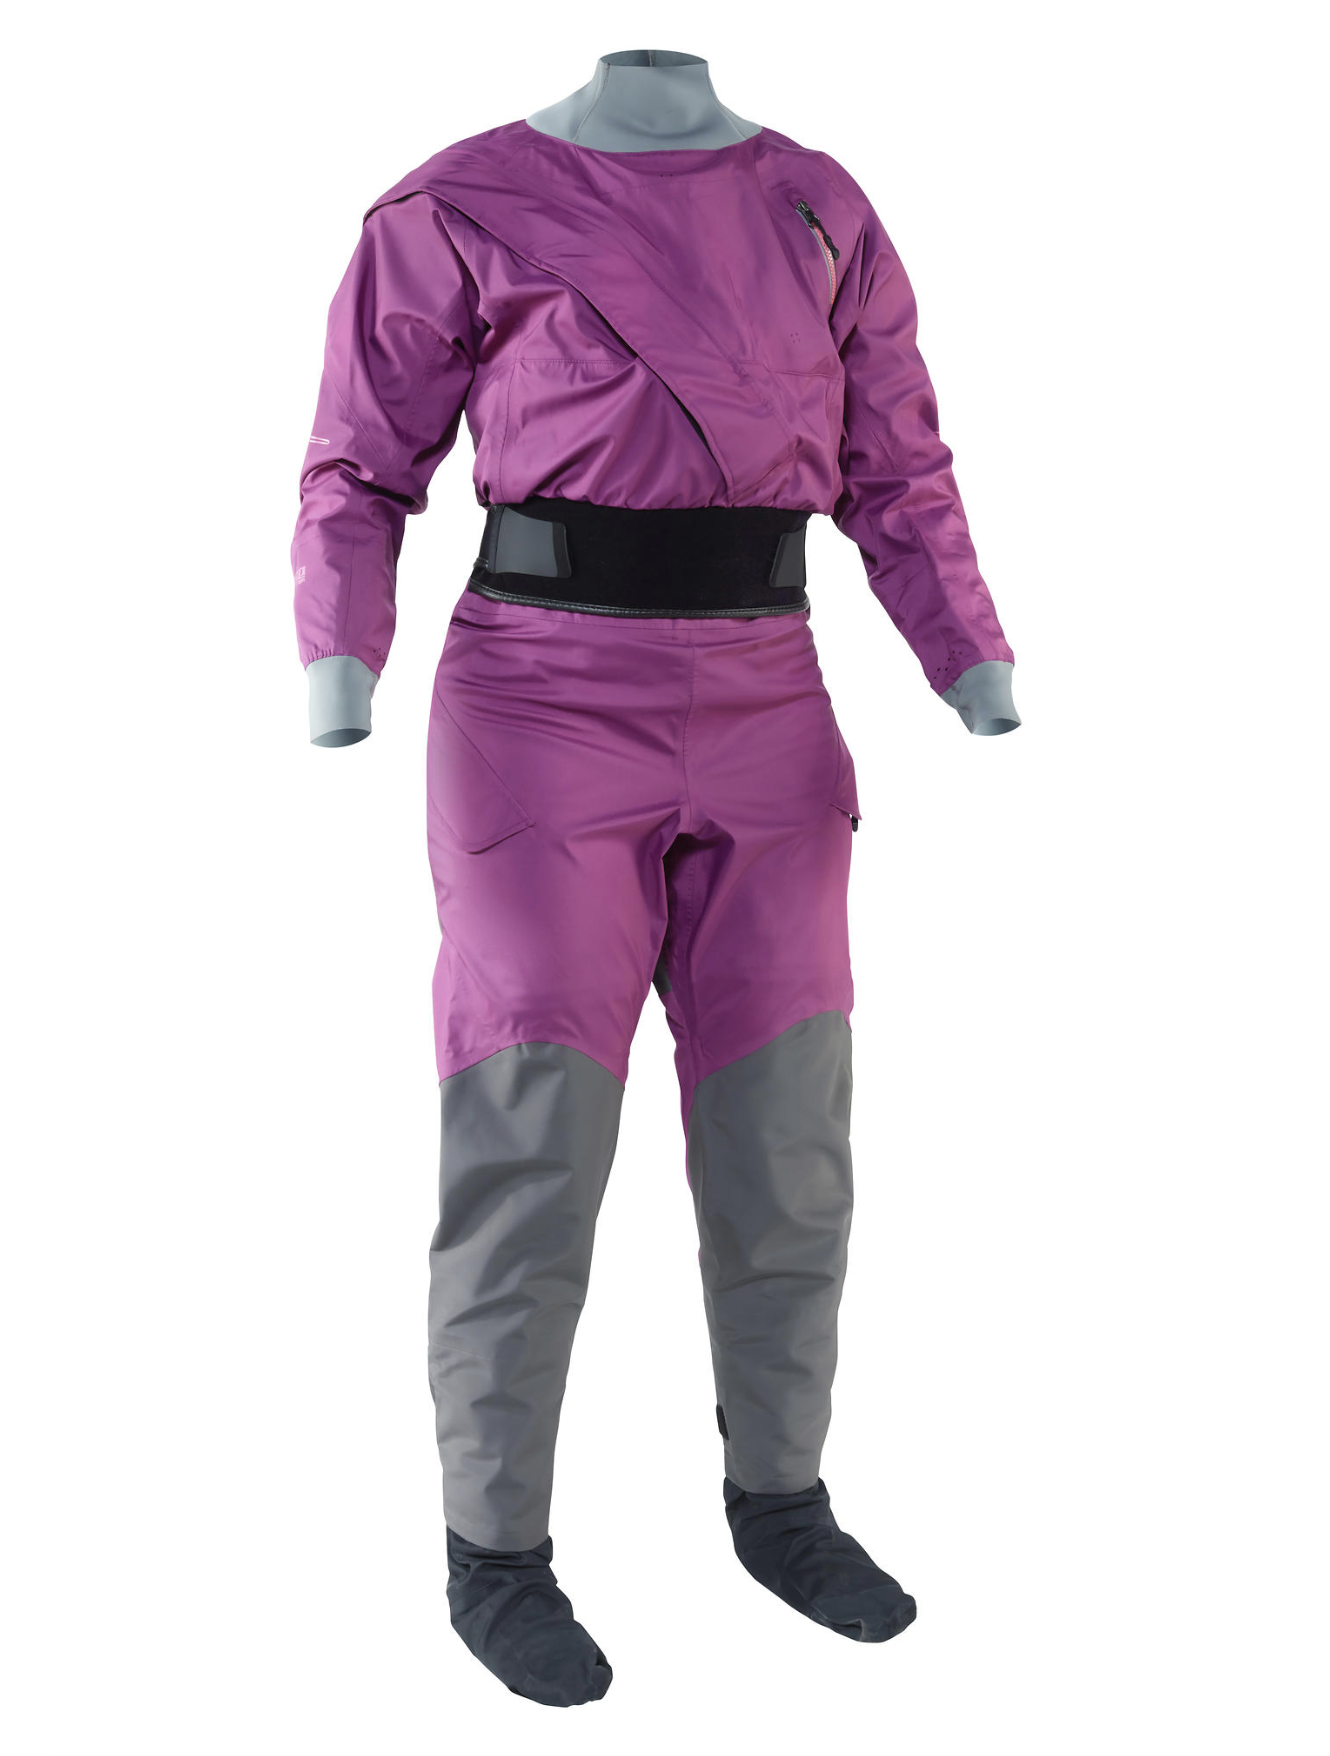 Technical Outerwear: Women's Crux Drysuit by NRS - Image 4835